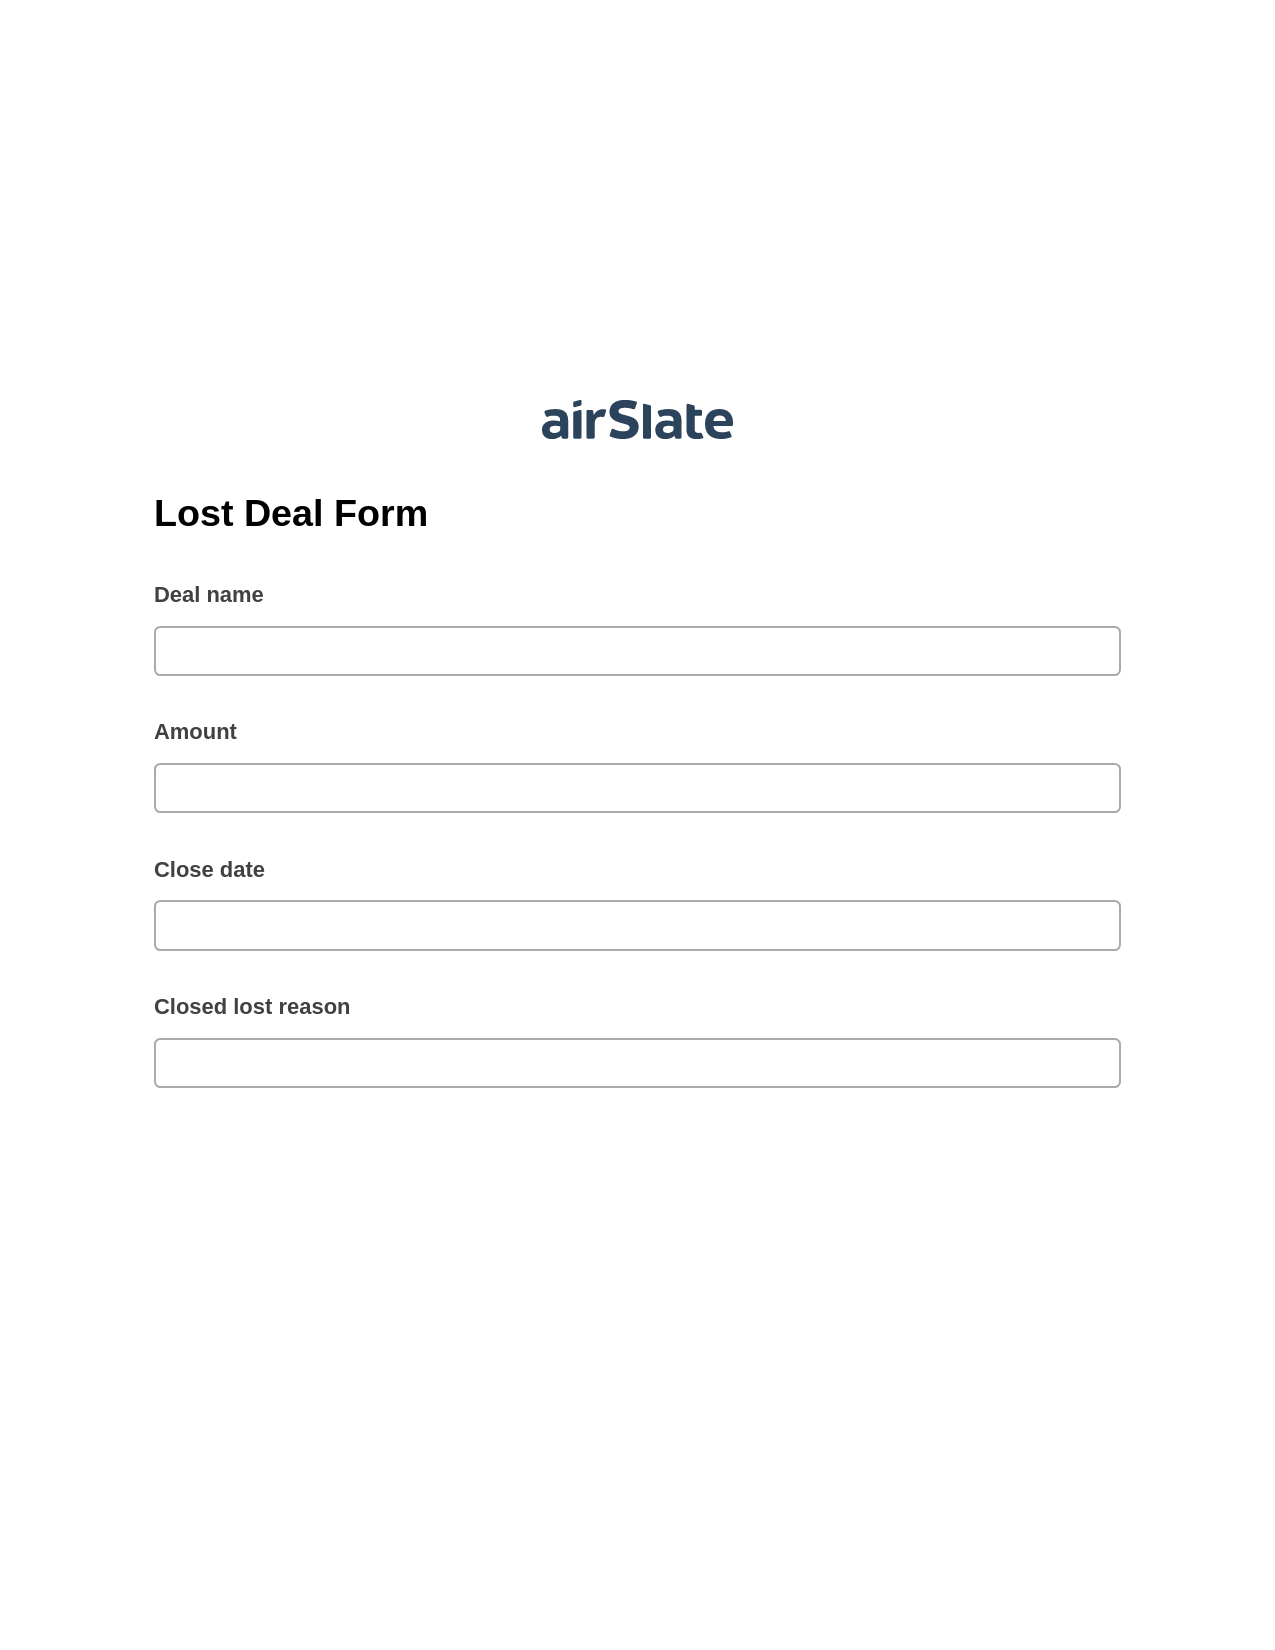 Lost Deal Form Pre-fill from CSV File Bot, Add Tags to Slate Bot, Archive to SharePoint Folder Bot